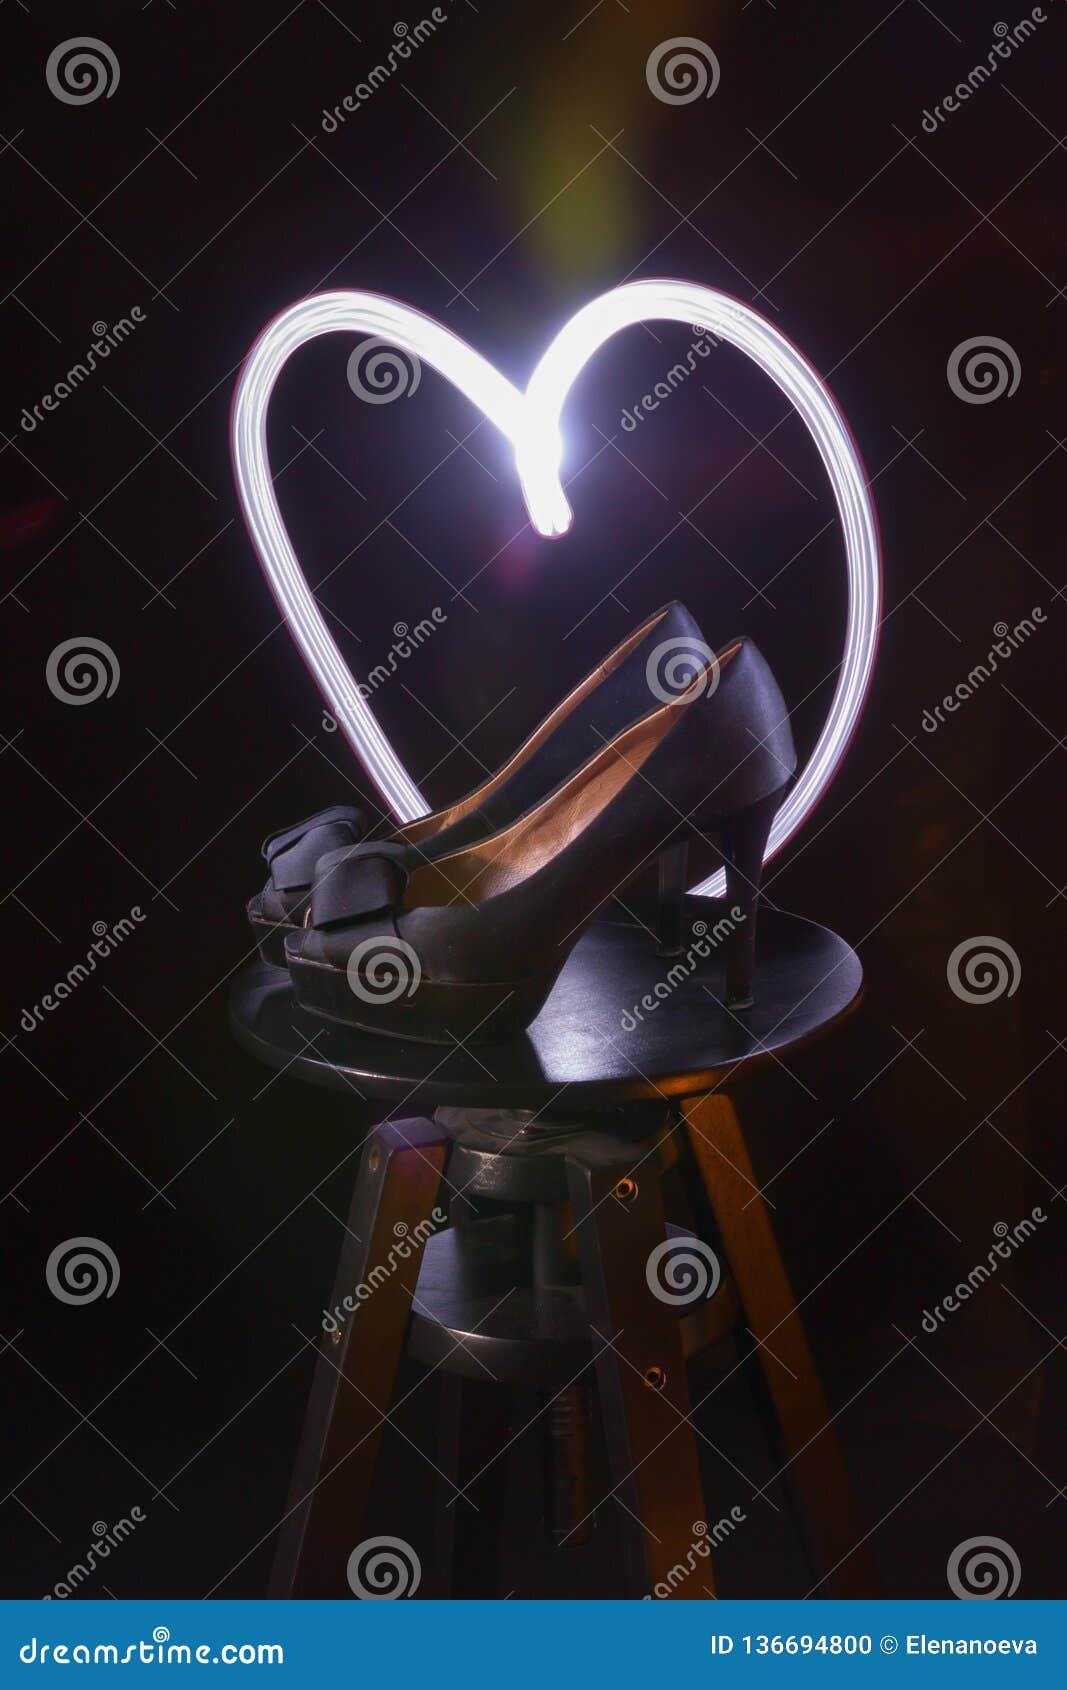 Black High Heels Shoes On Chair At Black Background With Heart